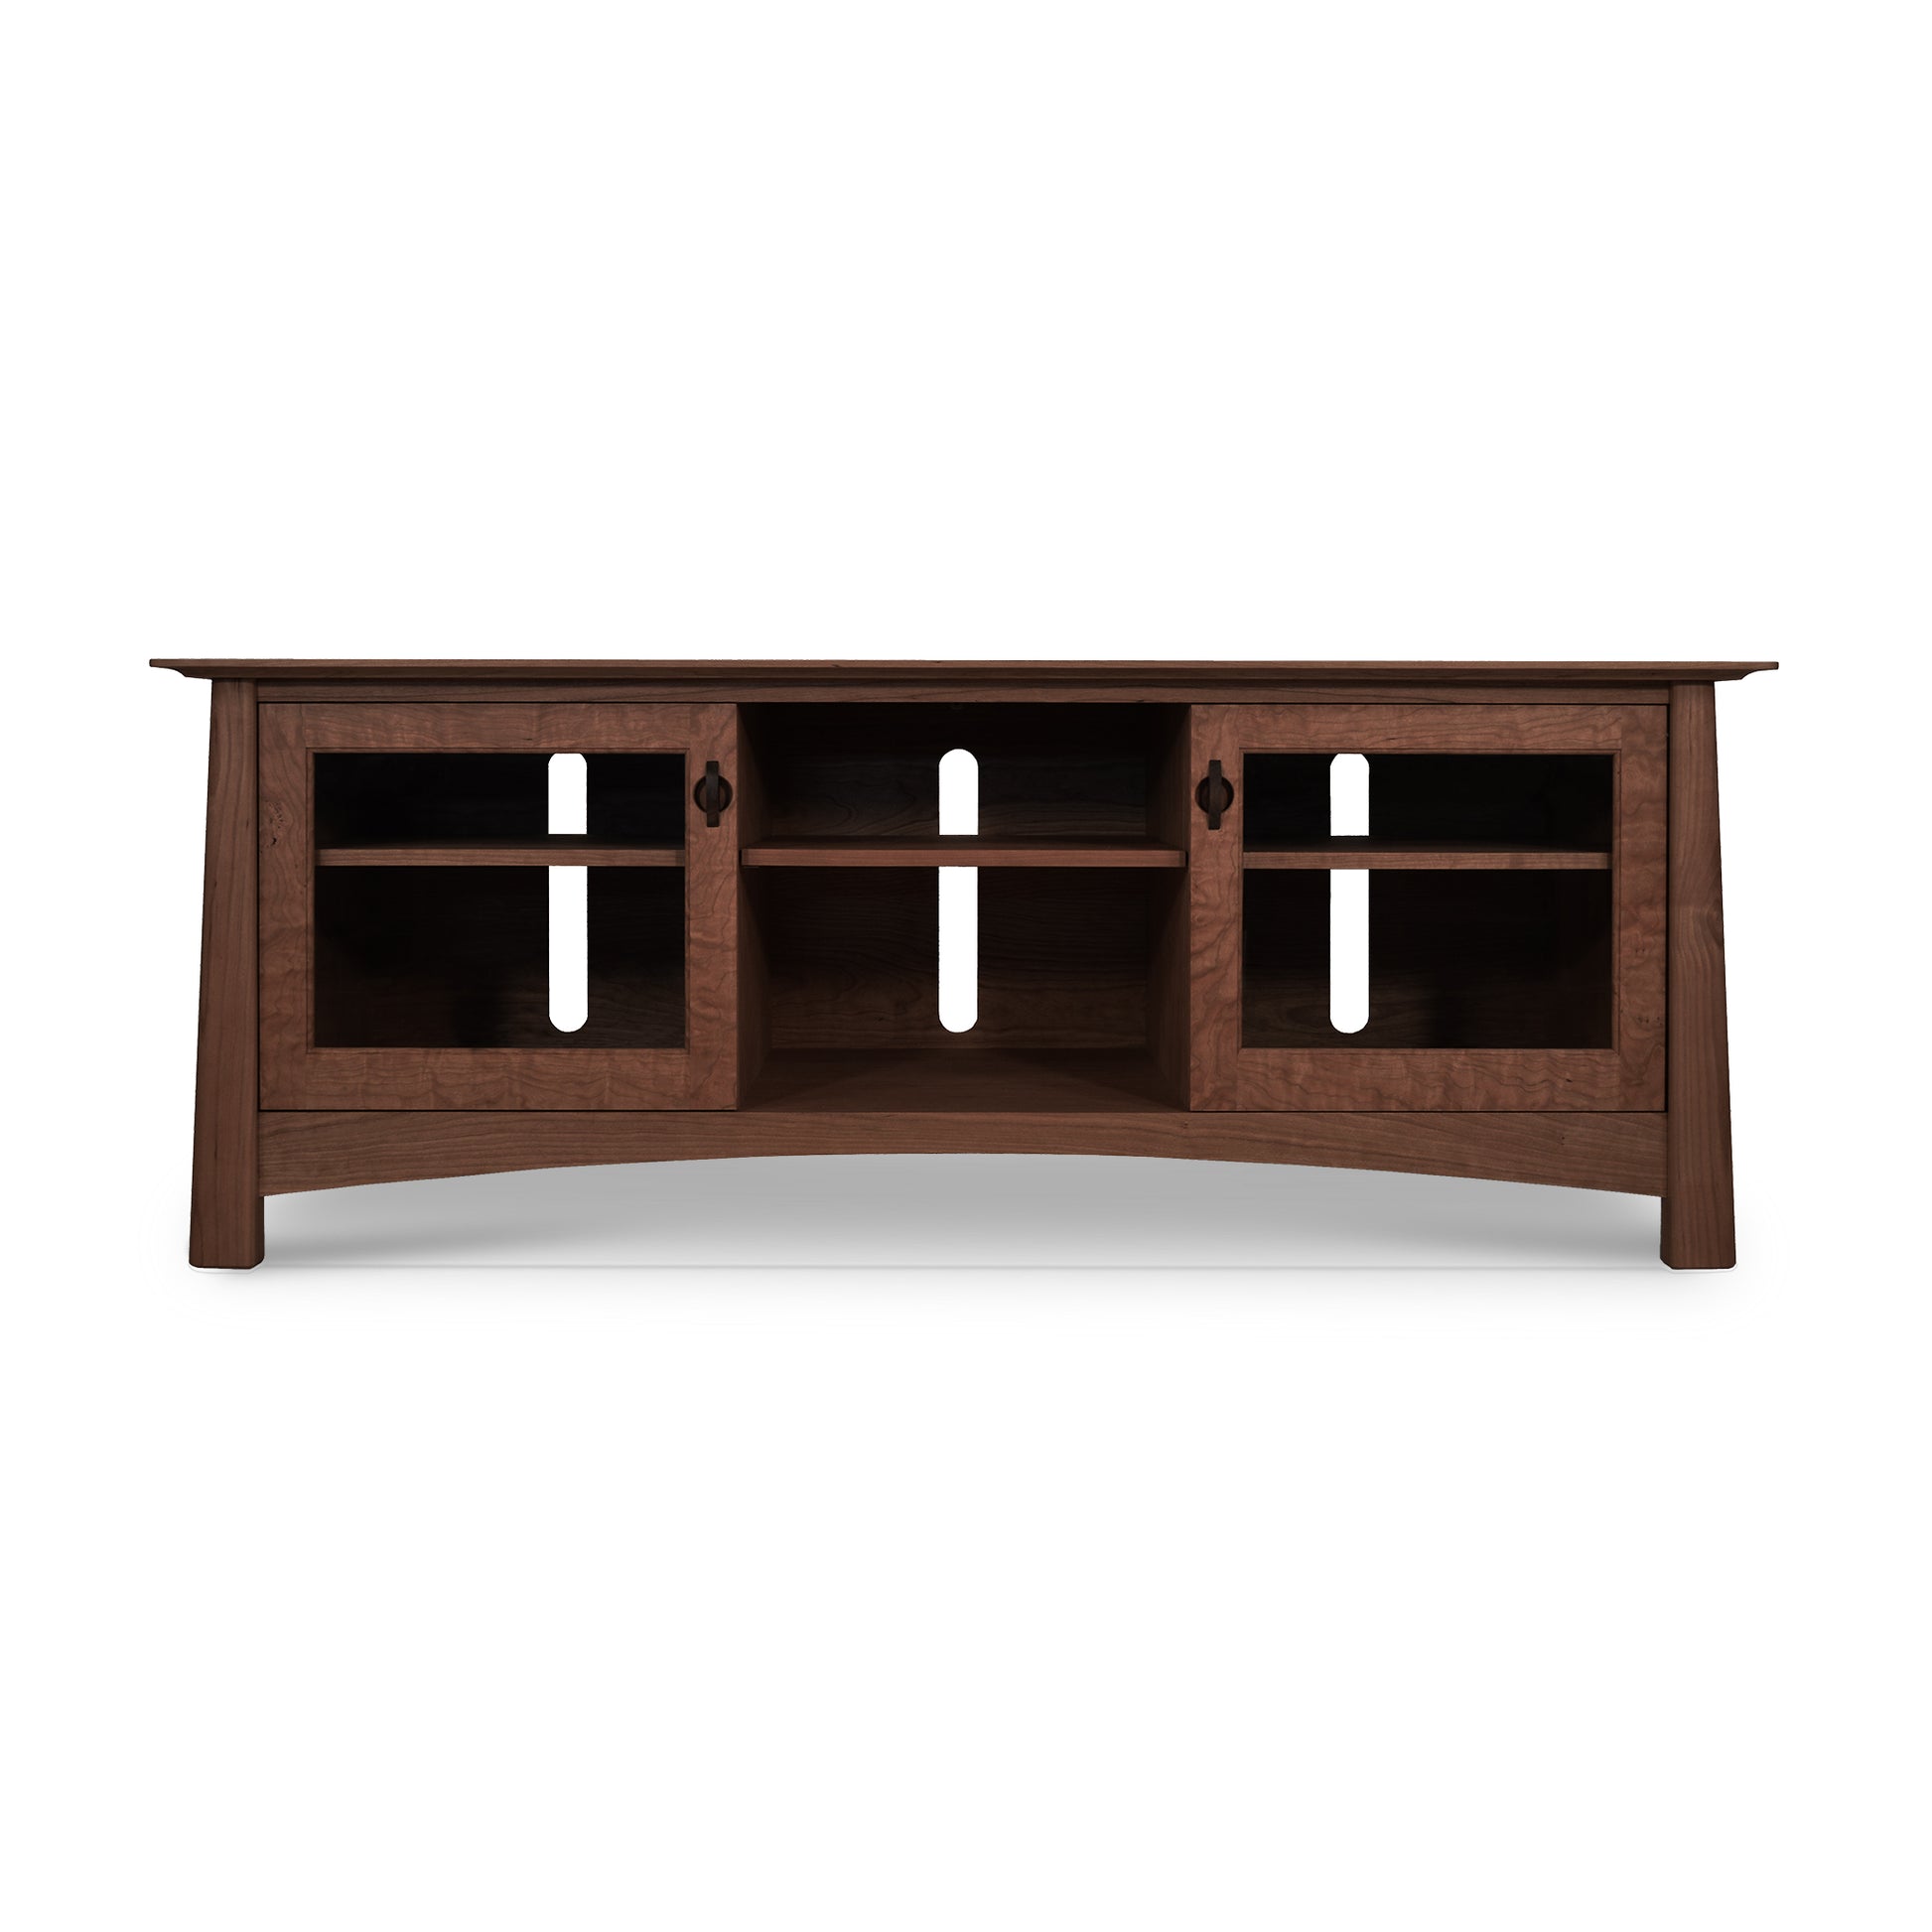 A Maple Corner Woodworks Cherry Moon 68" TV Console with a curved front, featuring three open shelves and additional storage space behind glass doors. The Cherry Moon TV Console is made of dark-stained wood and has a glossy finish.